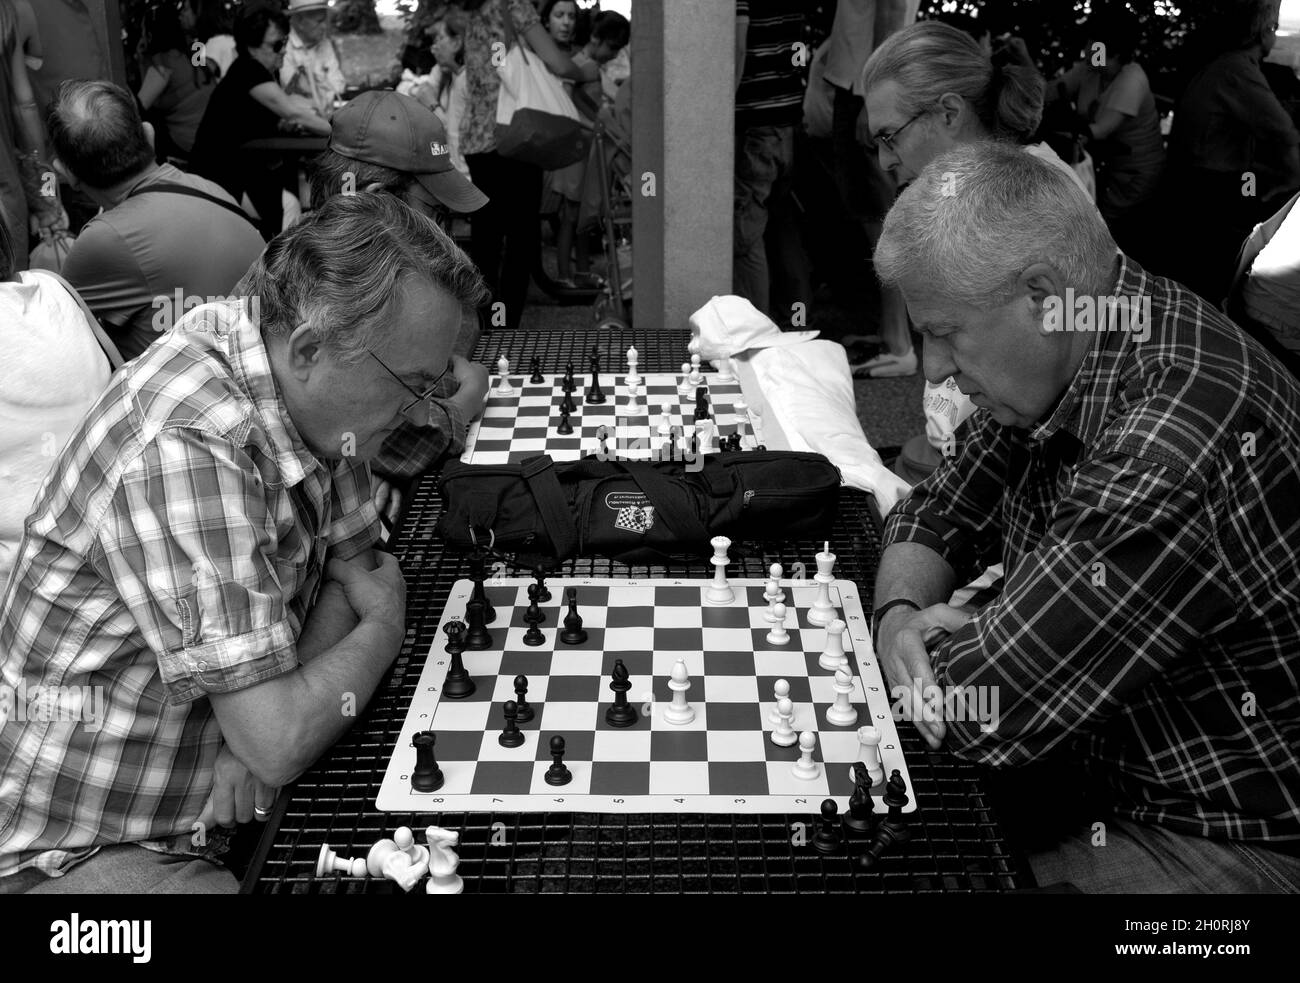 Street Photography, Milan, Italie, 2013, Chess Players. Banque D'Images